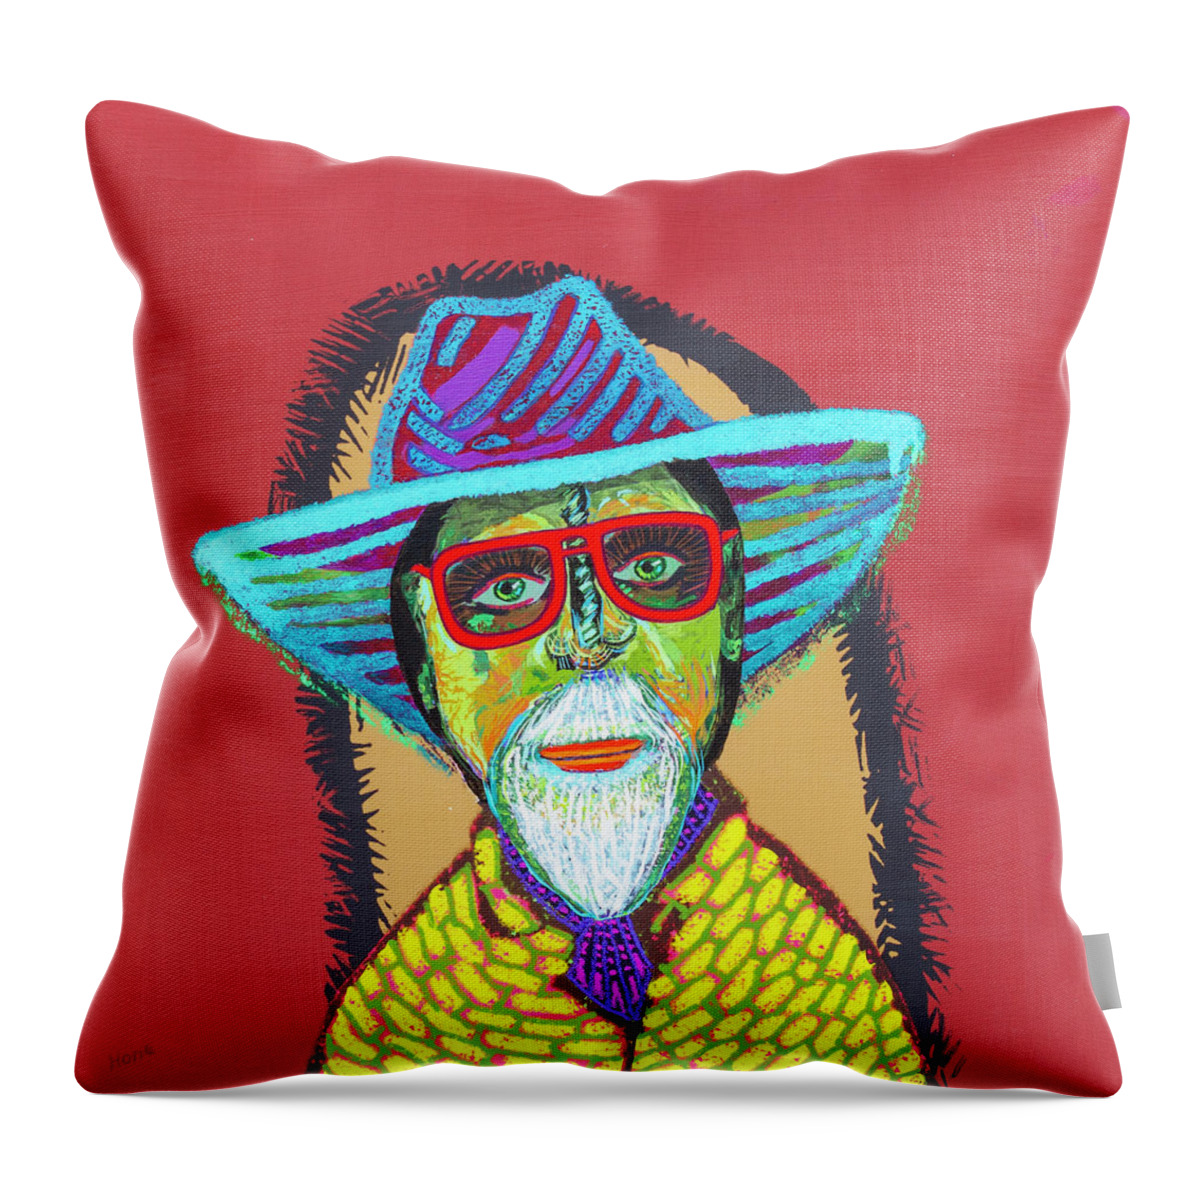 Visionary Visionaryart Art Painting 16x16 Self Selfportrait Portrait Bluehat Throw Pillow featuring the painting Self by Hone Williams